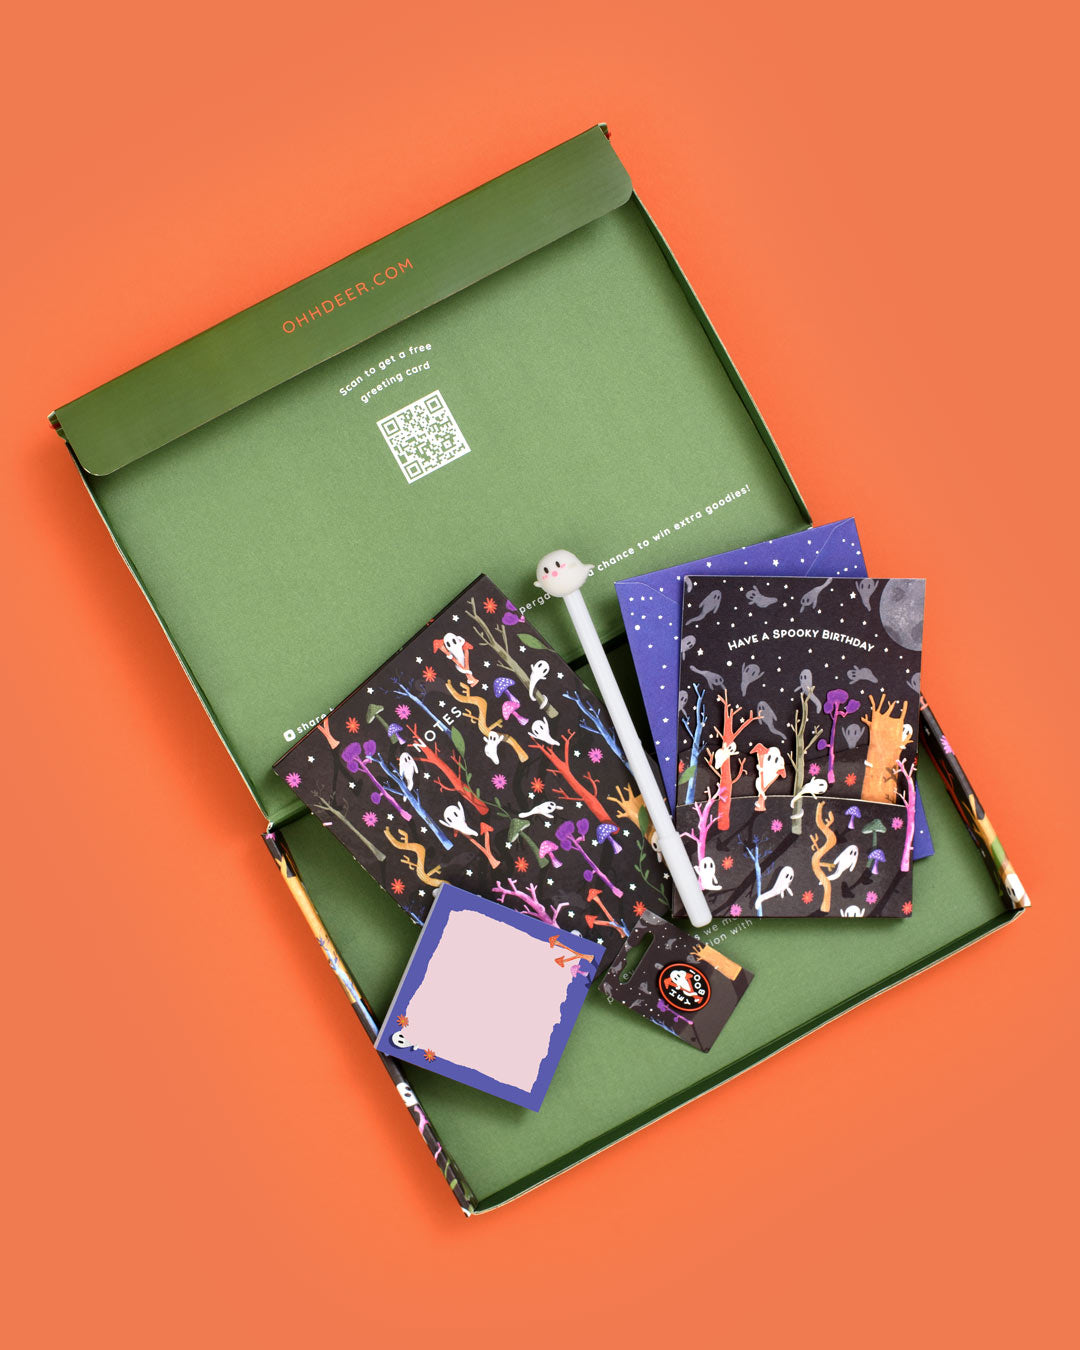 Papergang "Ghosts and Ghouls" Stationery Box (8633)